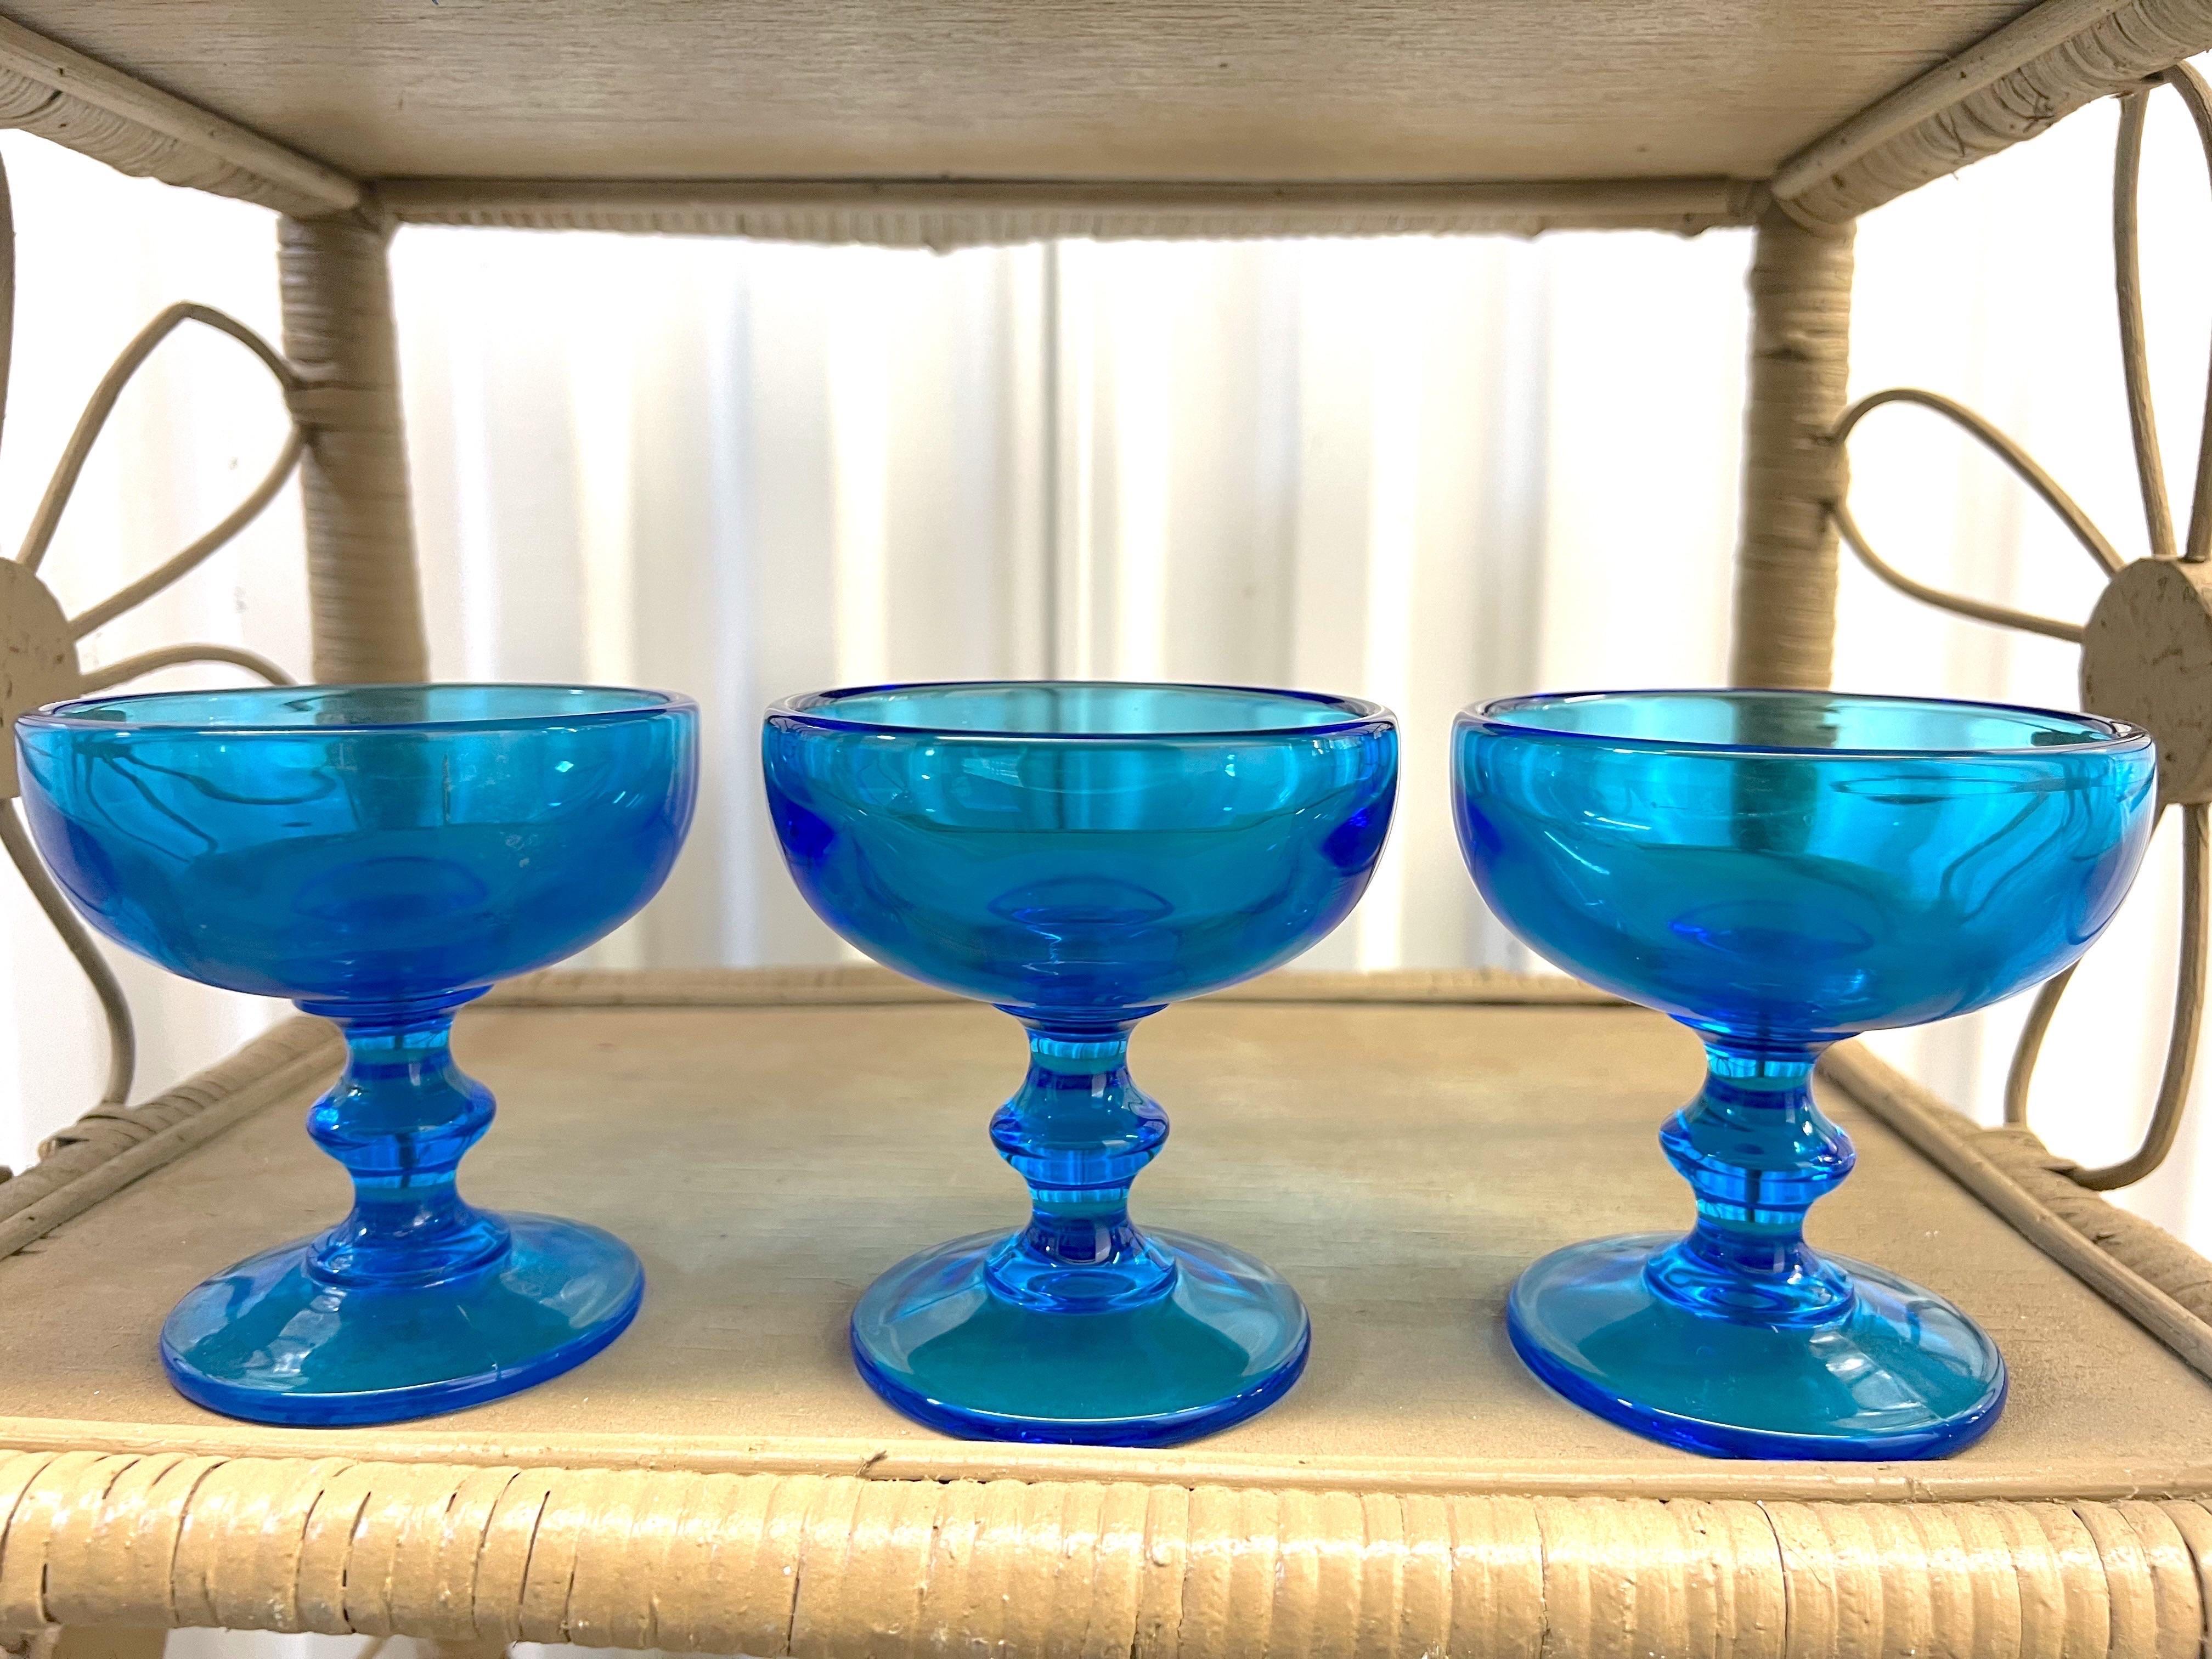 American Early 20th Century Cobalt Blue Champagne/ Dessert Glasses - Set of 6 For Sale